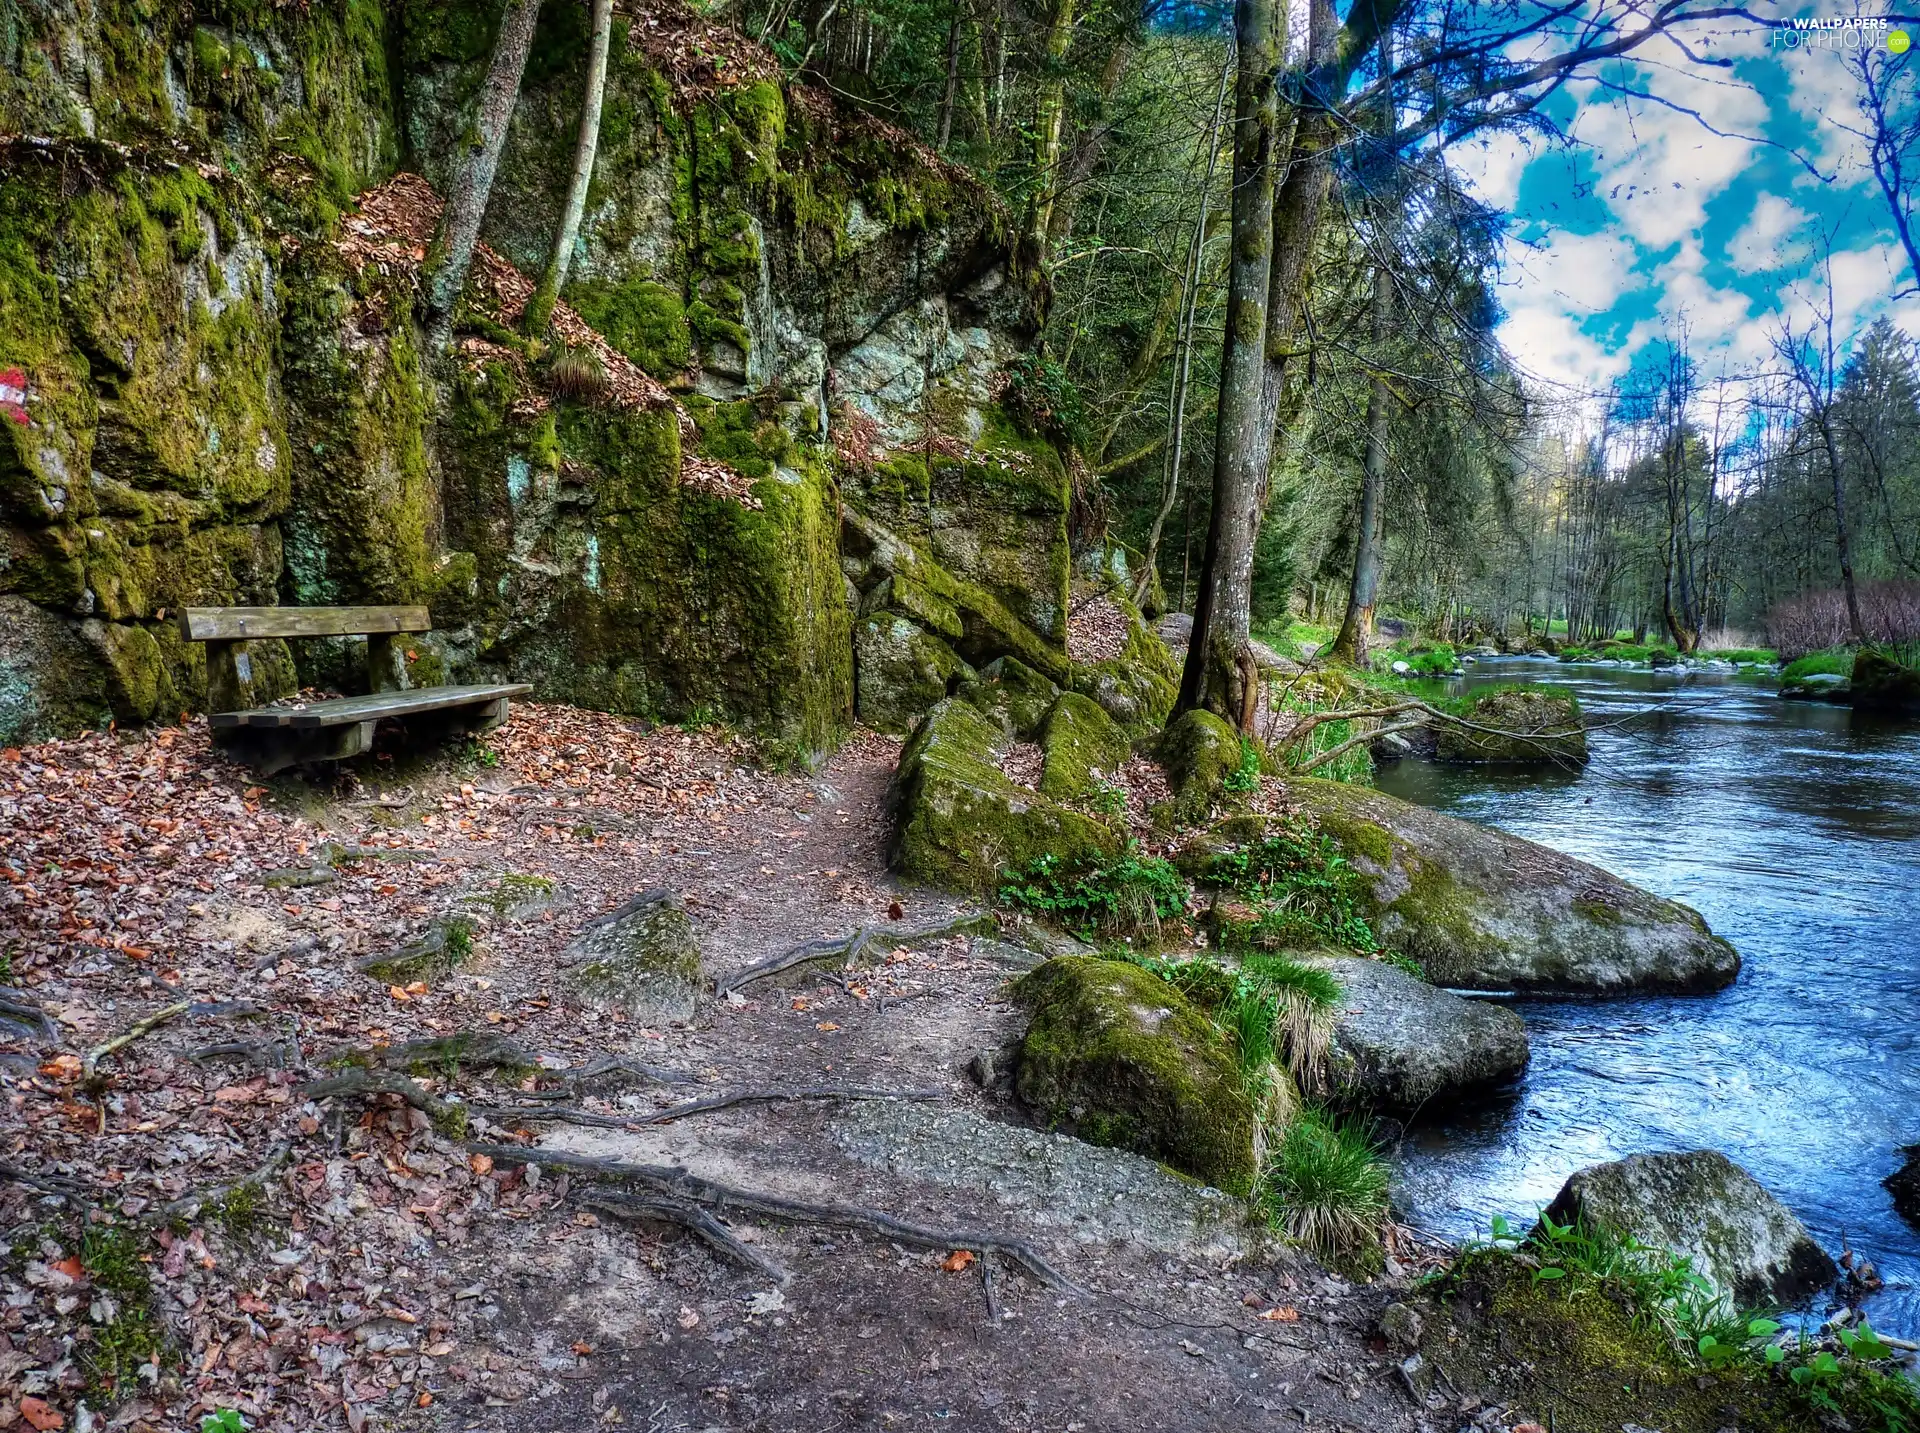 River, Bench, rocks, forest, clouds